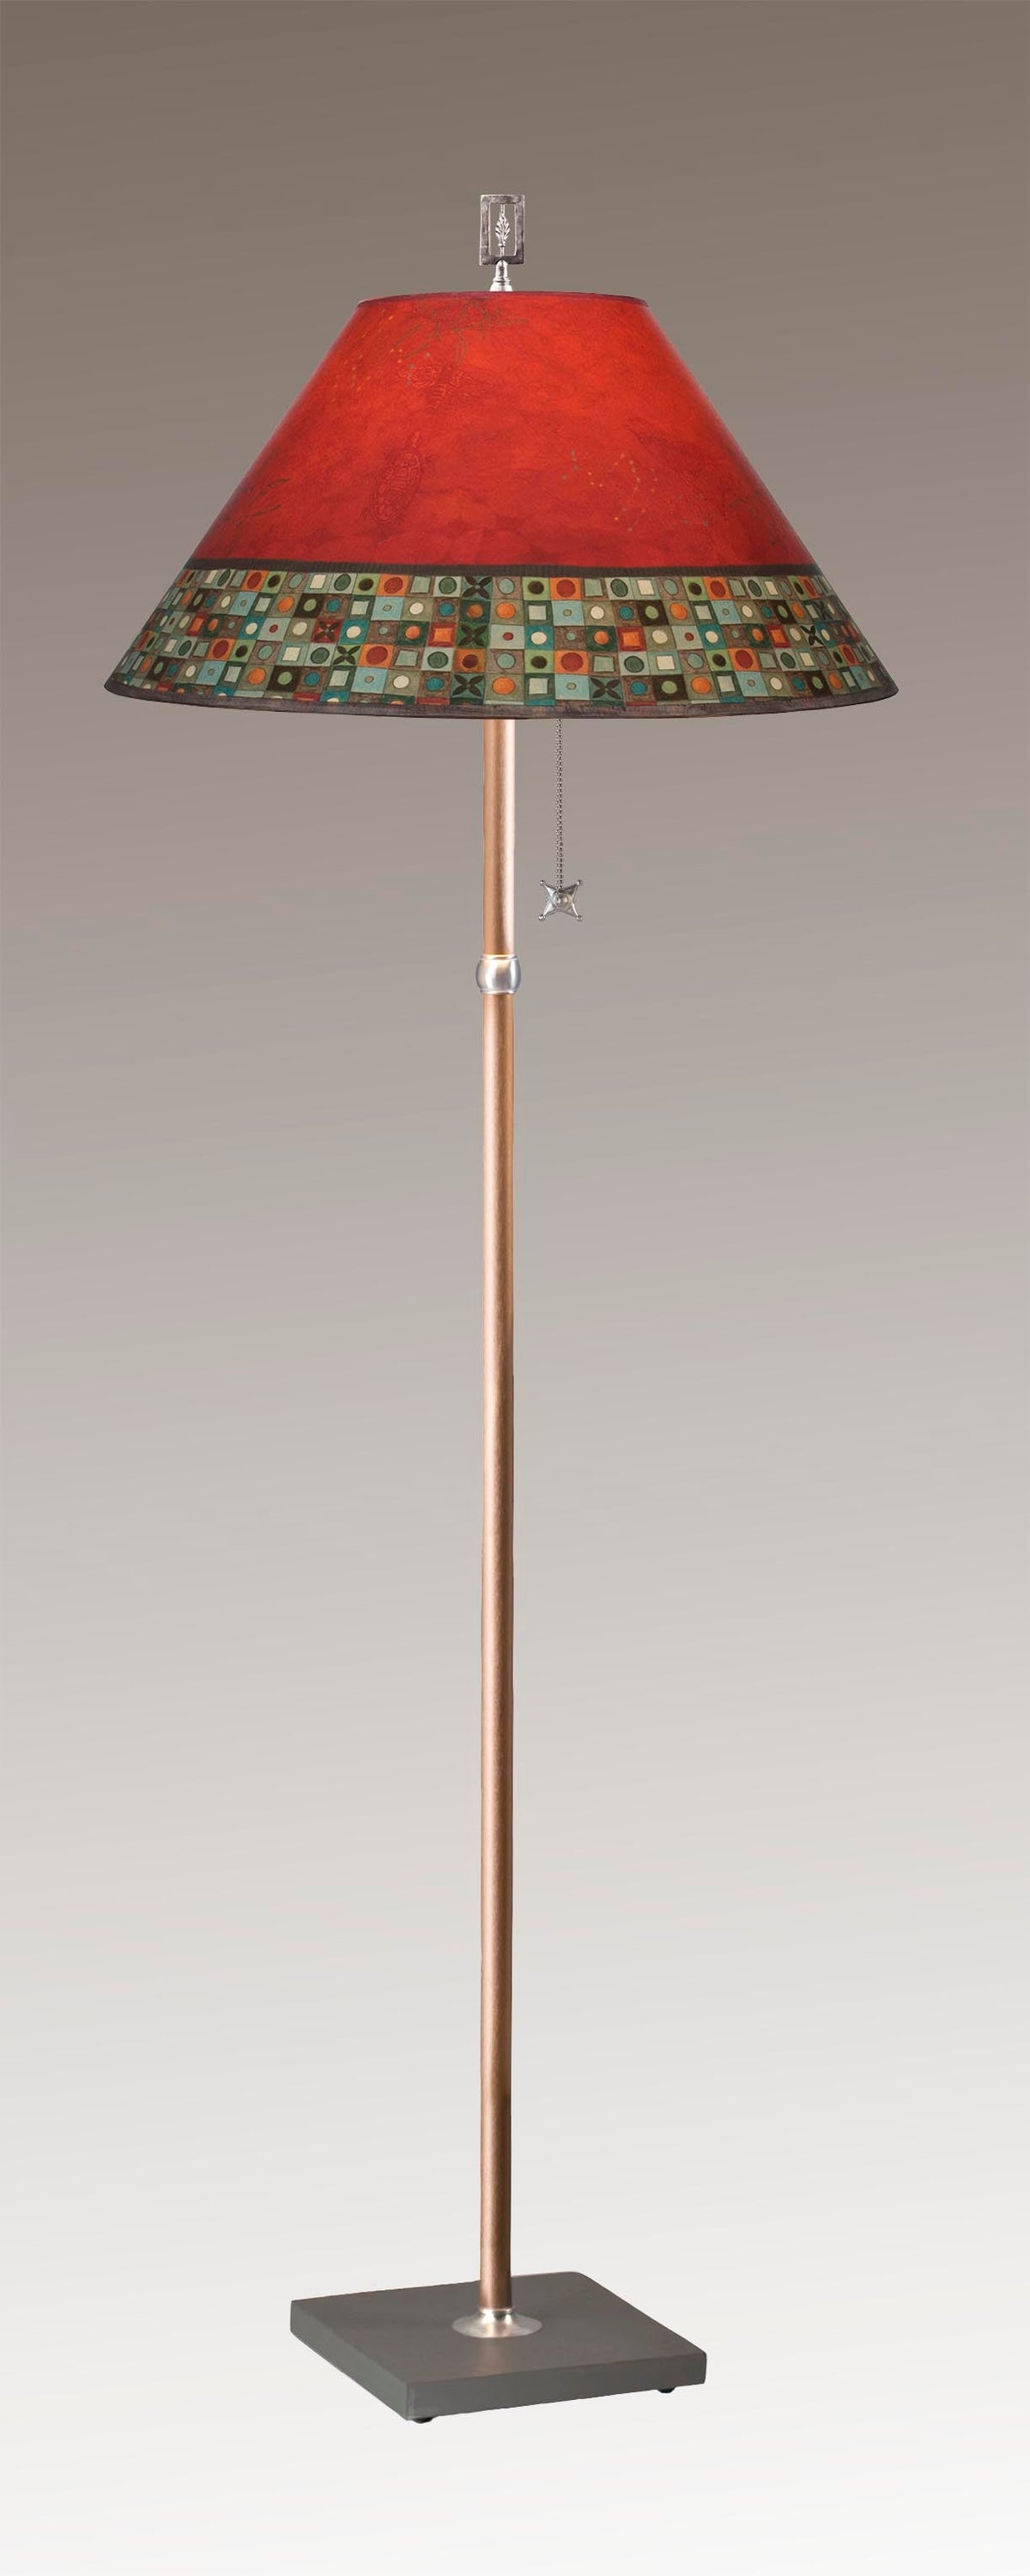 Copper Floor Lamp Large Conical Shade in Red Mosaic